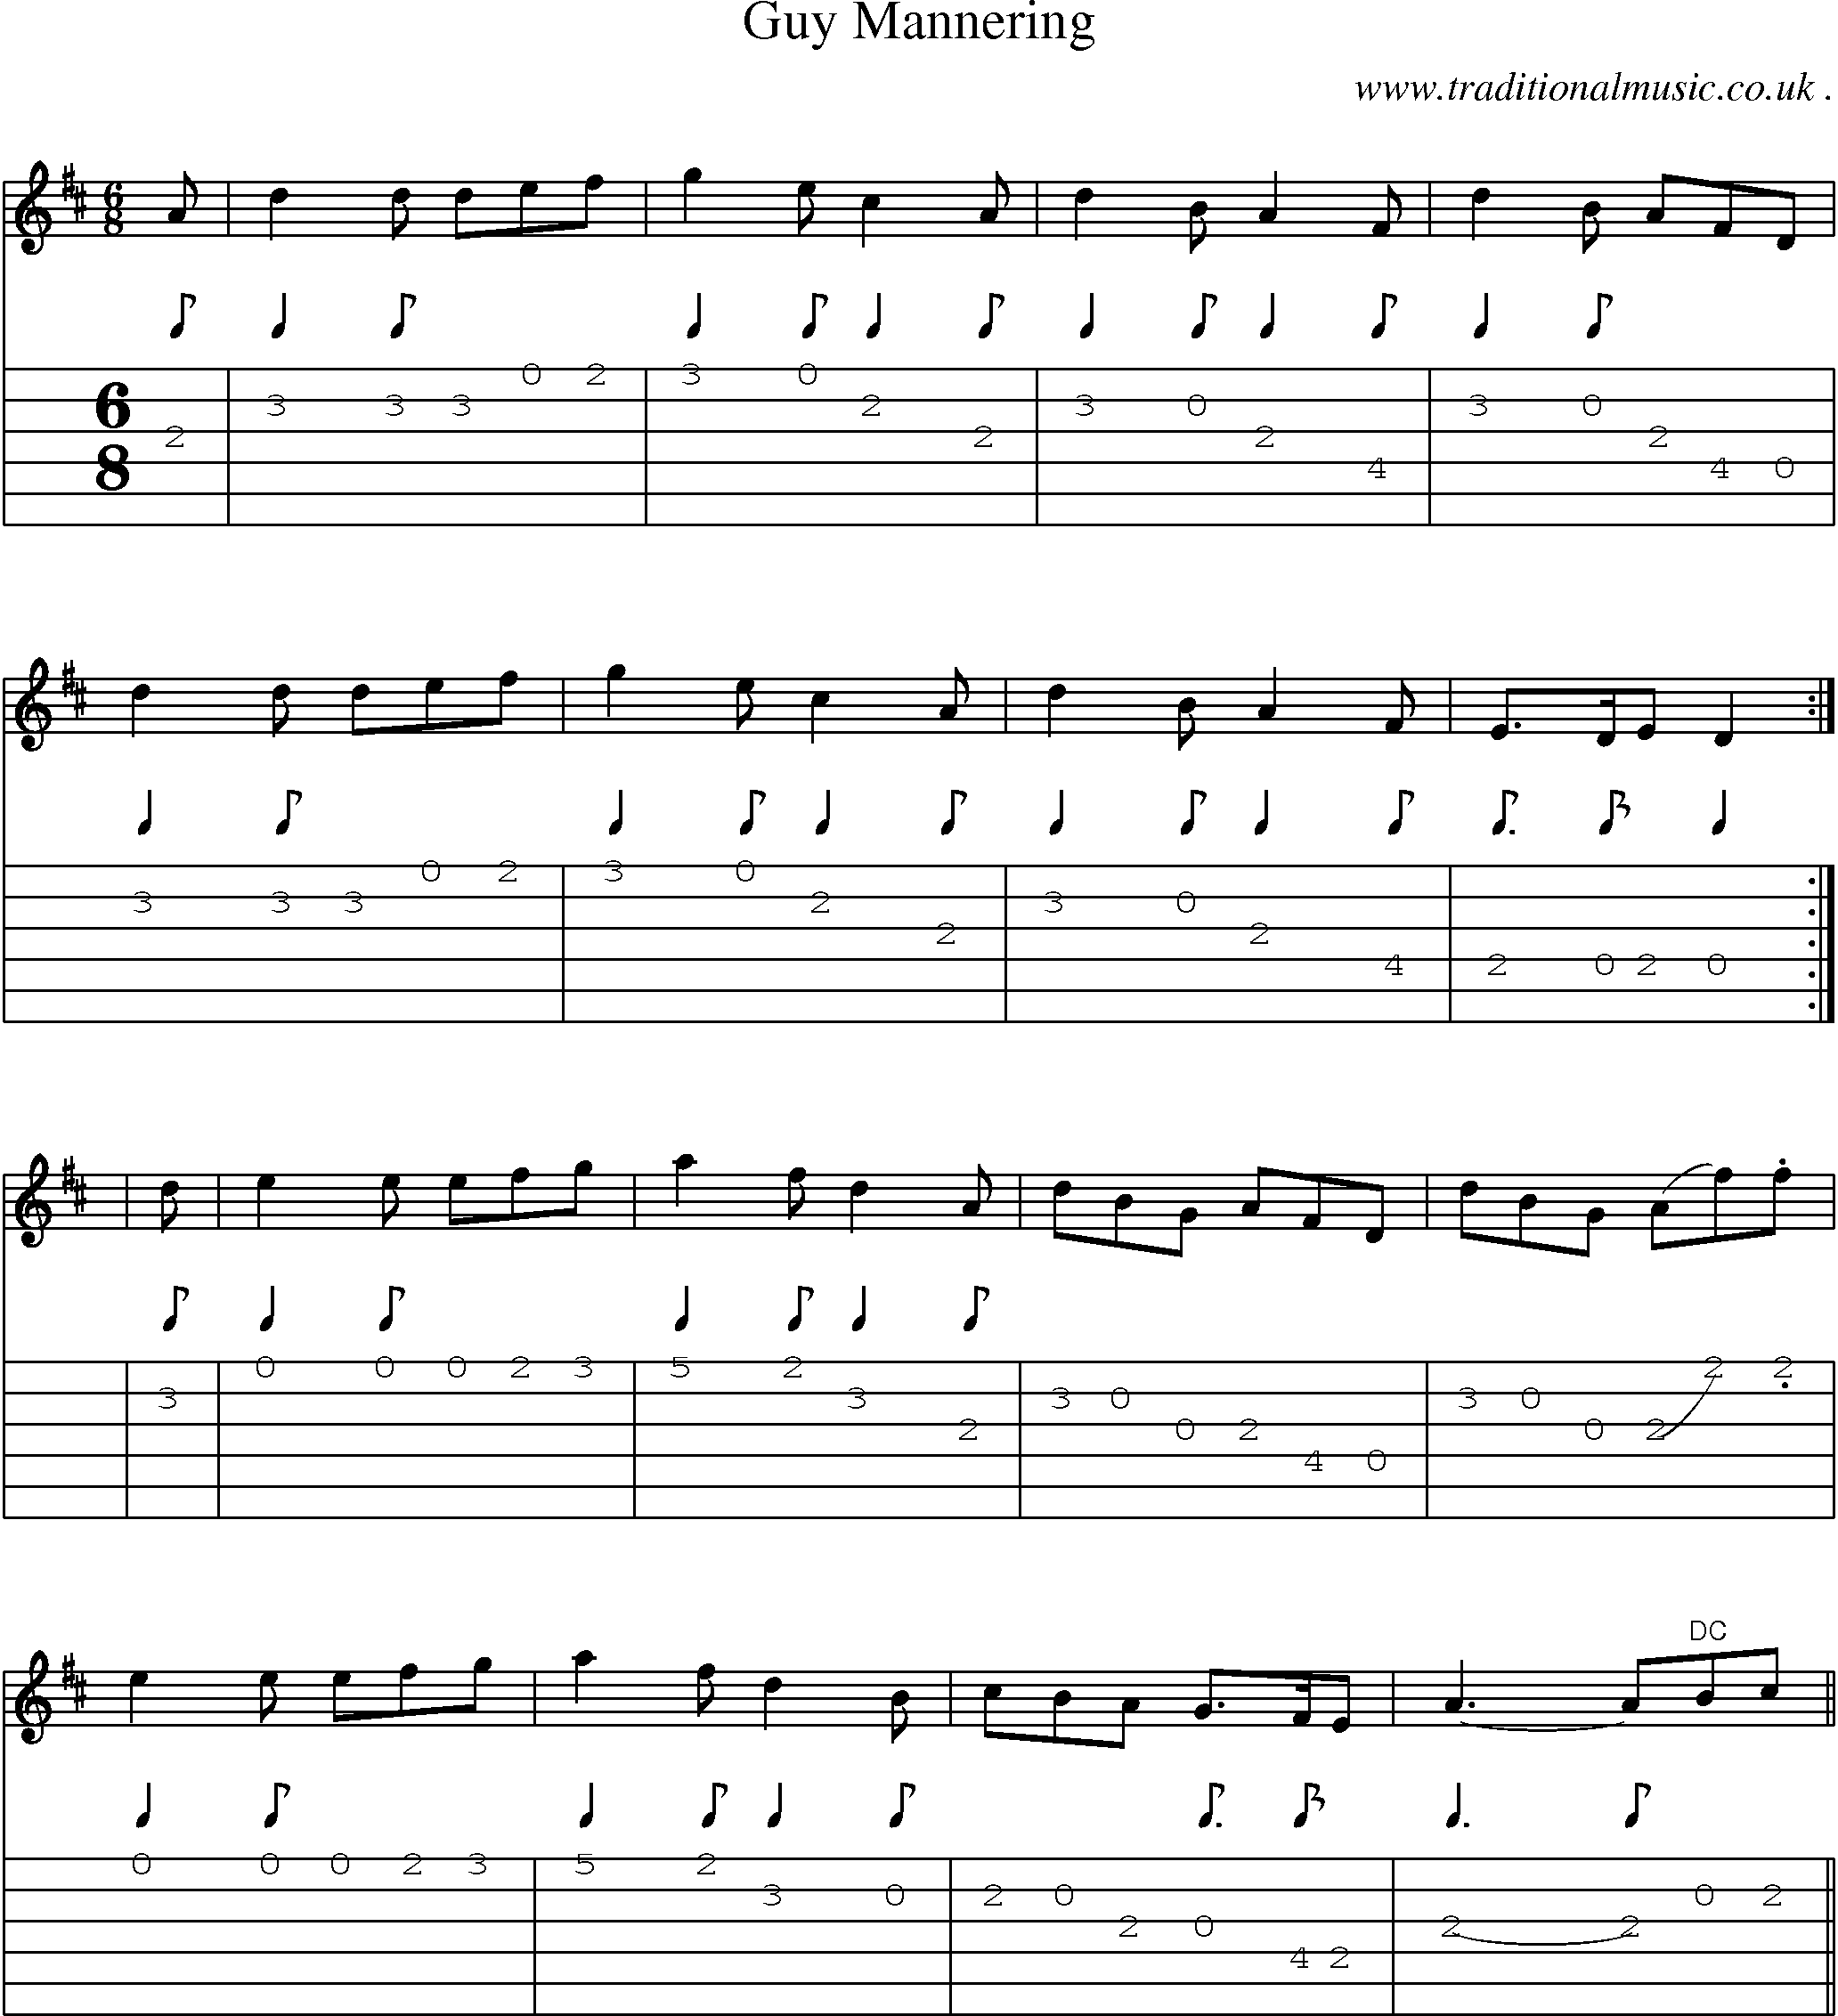 Sheet-Music and Guitar Tabs for Guy Mannering